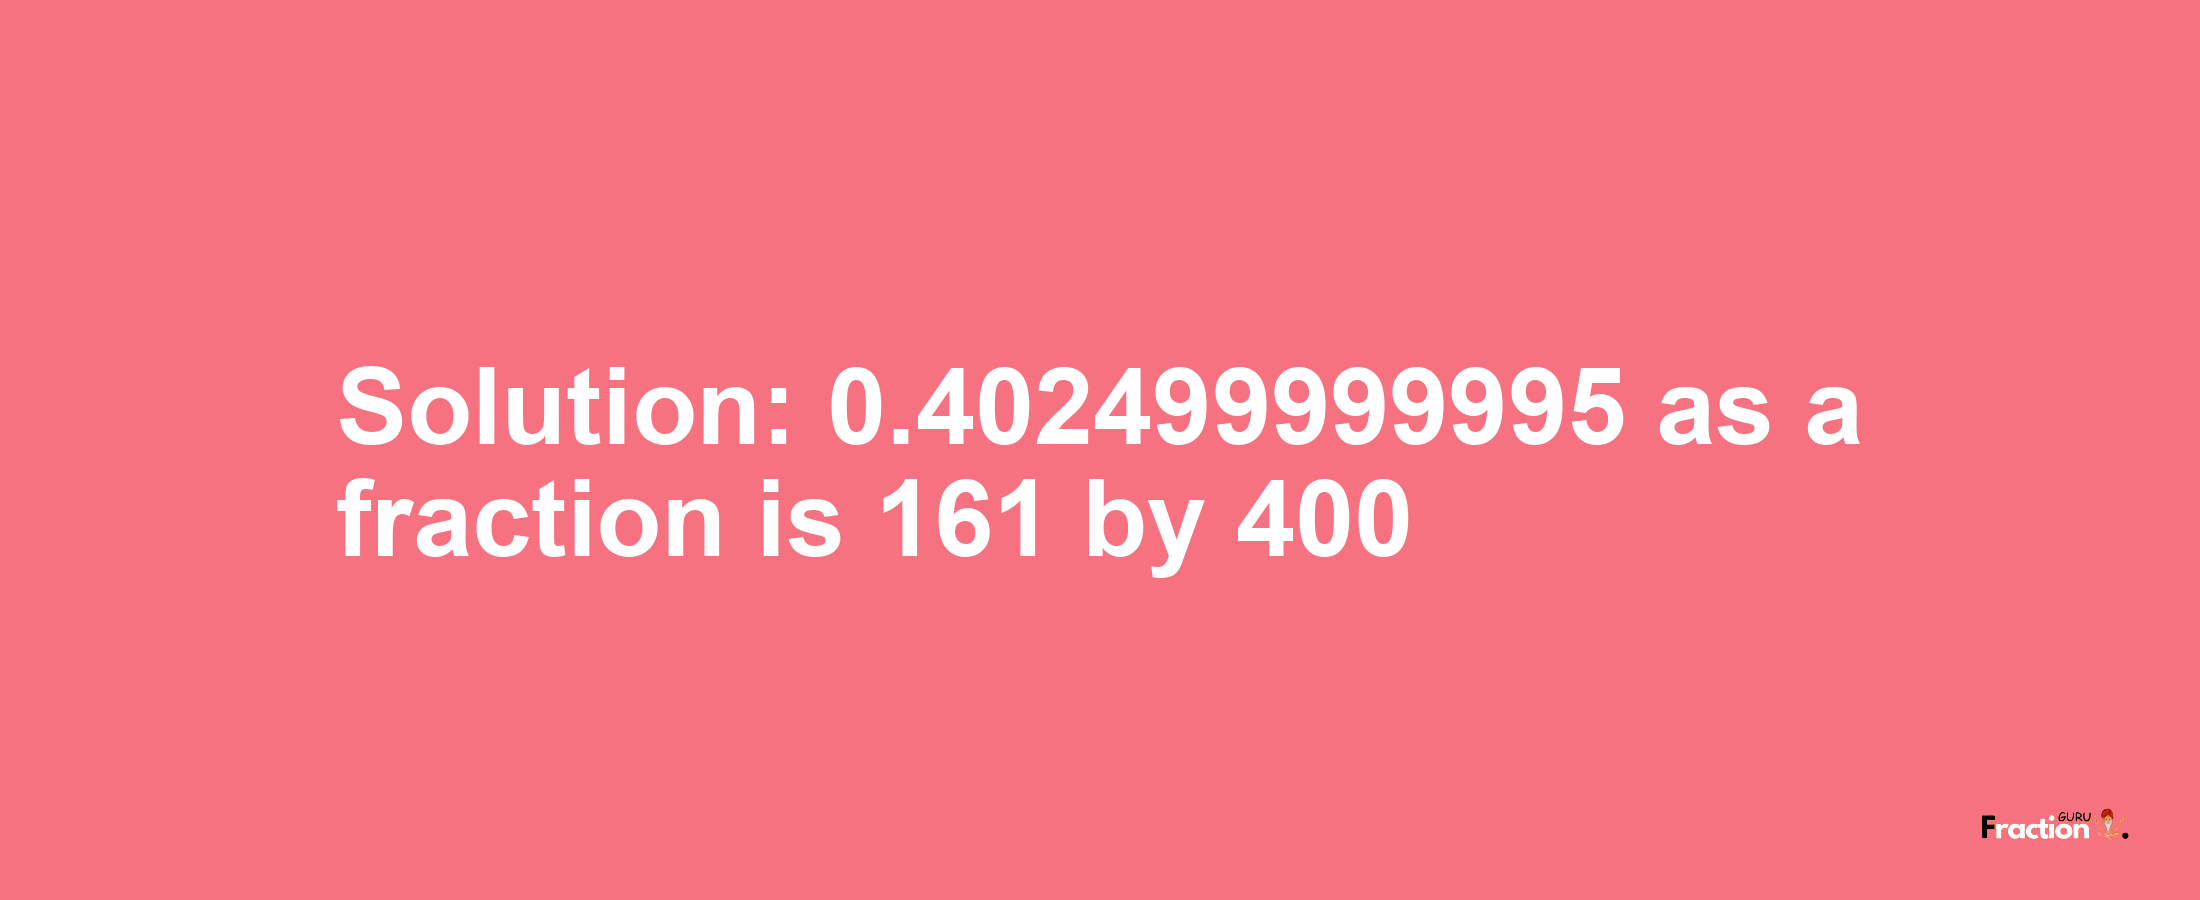 Solution:0.402499999995 as a fraction is 161/400